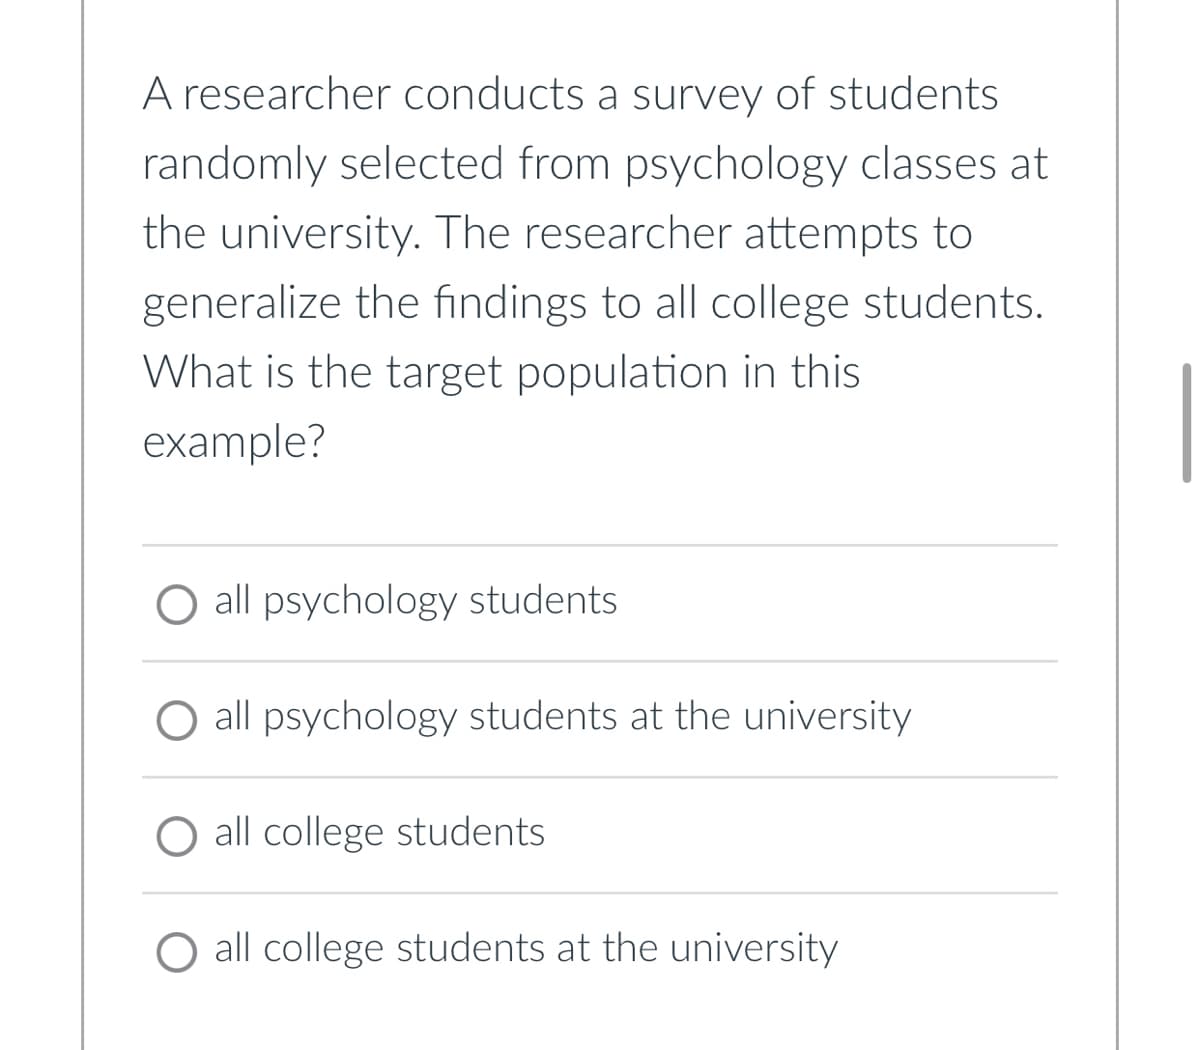 A researcher conducts a survey of students
randomly selected from psychology classes at
the university. The researcher attempts to
generalize the findings to all college students.
What is the target population in this
example?
O all psychology students
all psychology students at the university
O all college students
all college students at the university